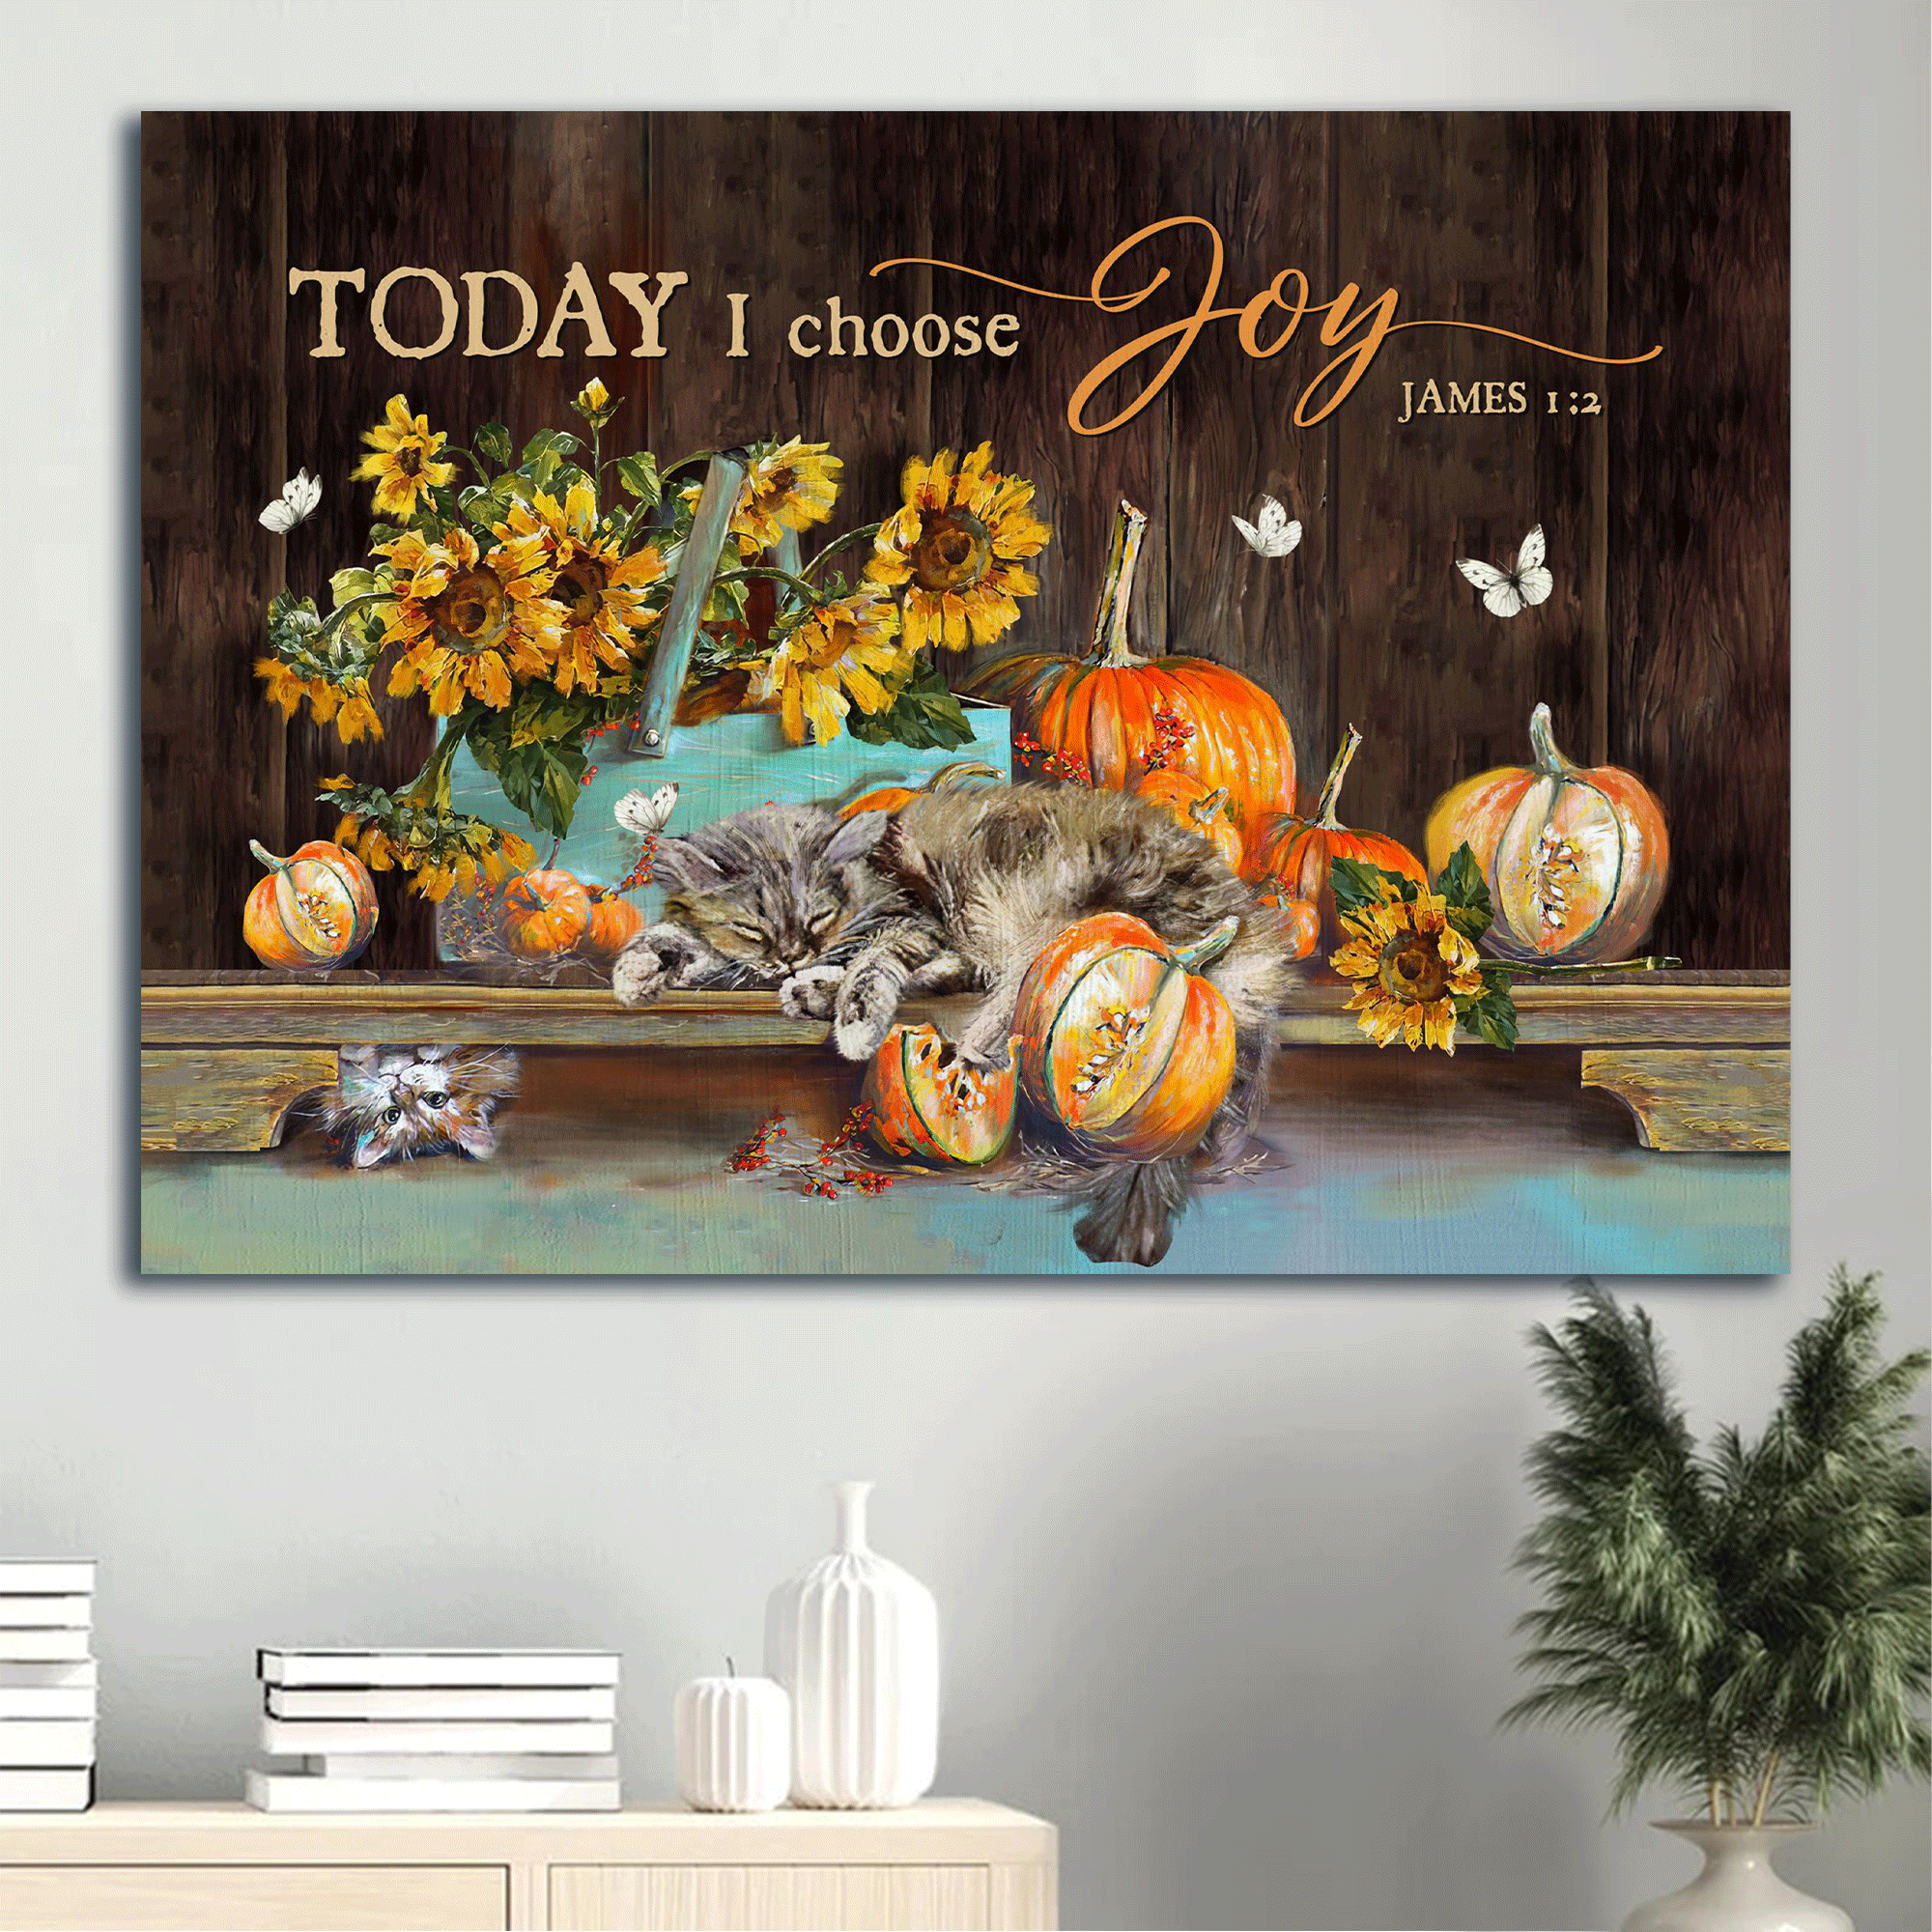 Jesus Landscape Canvas - Sleeping cat, Watercolor pumpkin, Sunflower drawing, Today I choose joy canvas- Gift for Christian , cat lover - Landscape Canvas Prints, Christian Wall Art